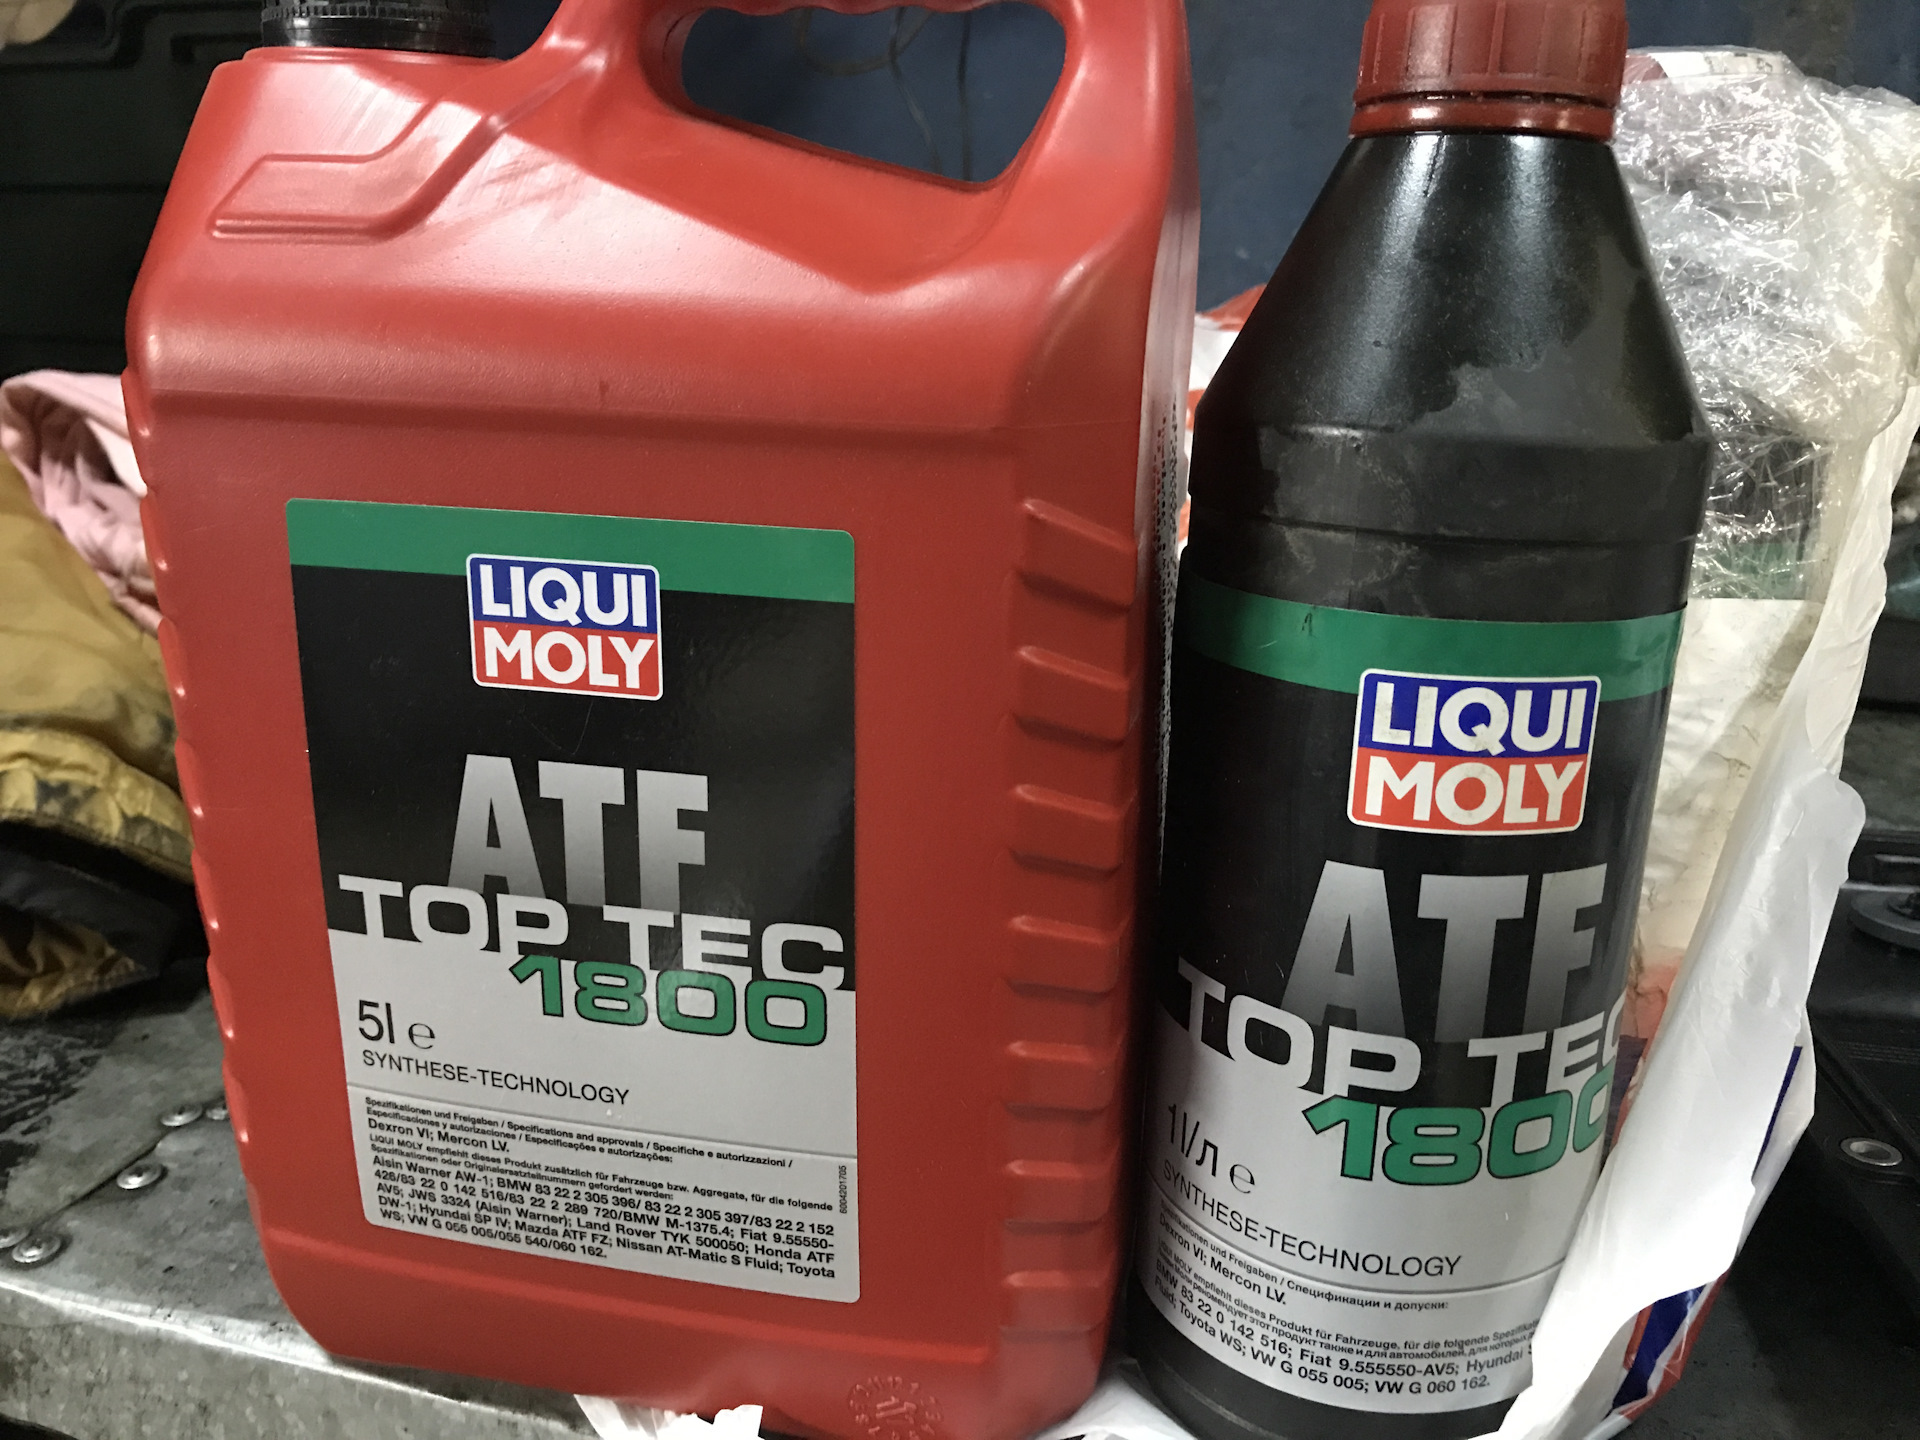 Liqui moly top tec 1800. Масло автомат Land Rover Discovery 3. Масло АКПП Land Rover Discovery 3. Liqui Moly Top Tec ATF 1800 цвет. Масло АКПП Дискавери 3 2.7.